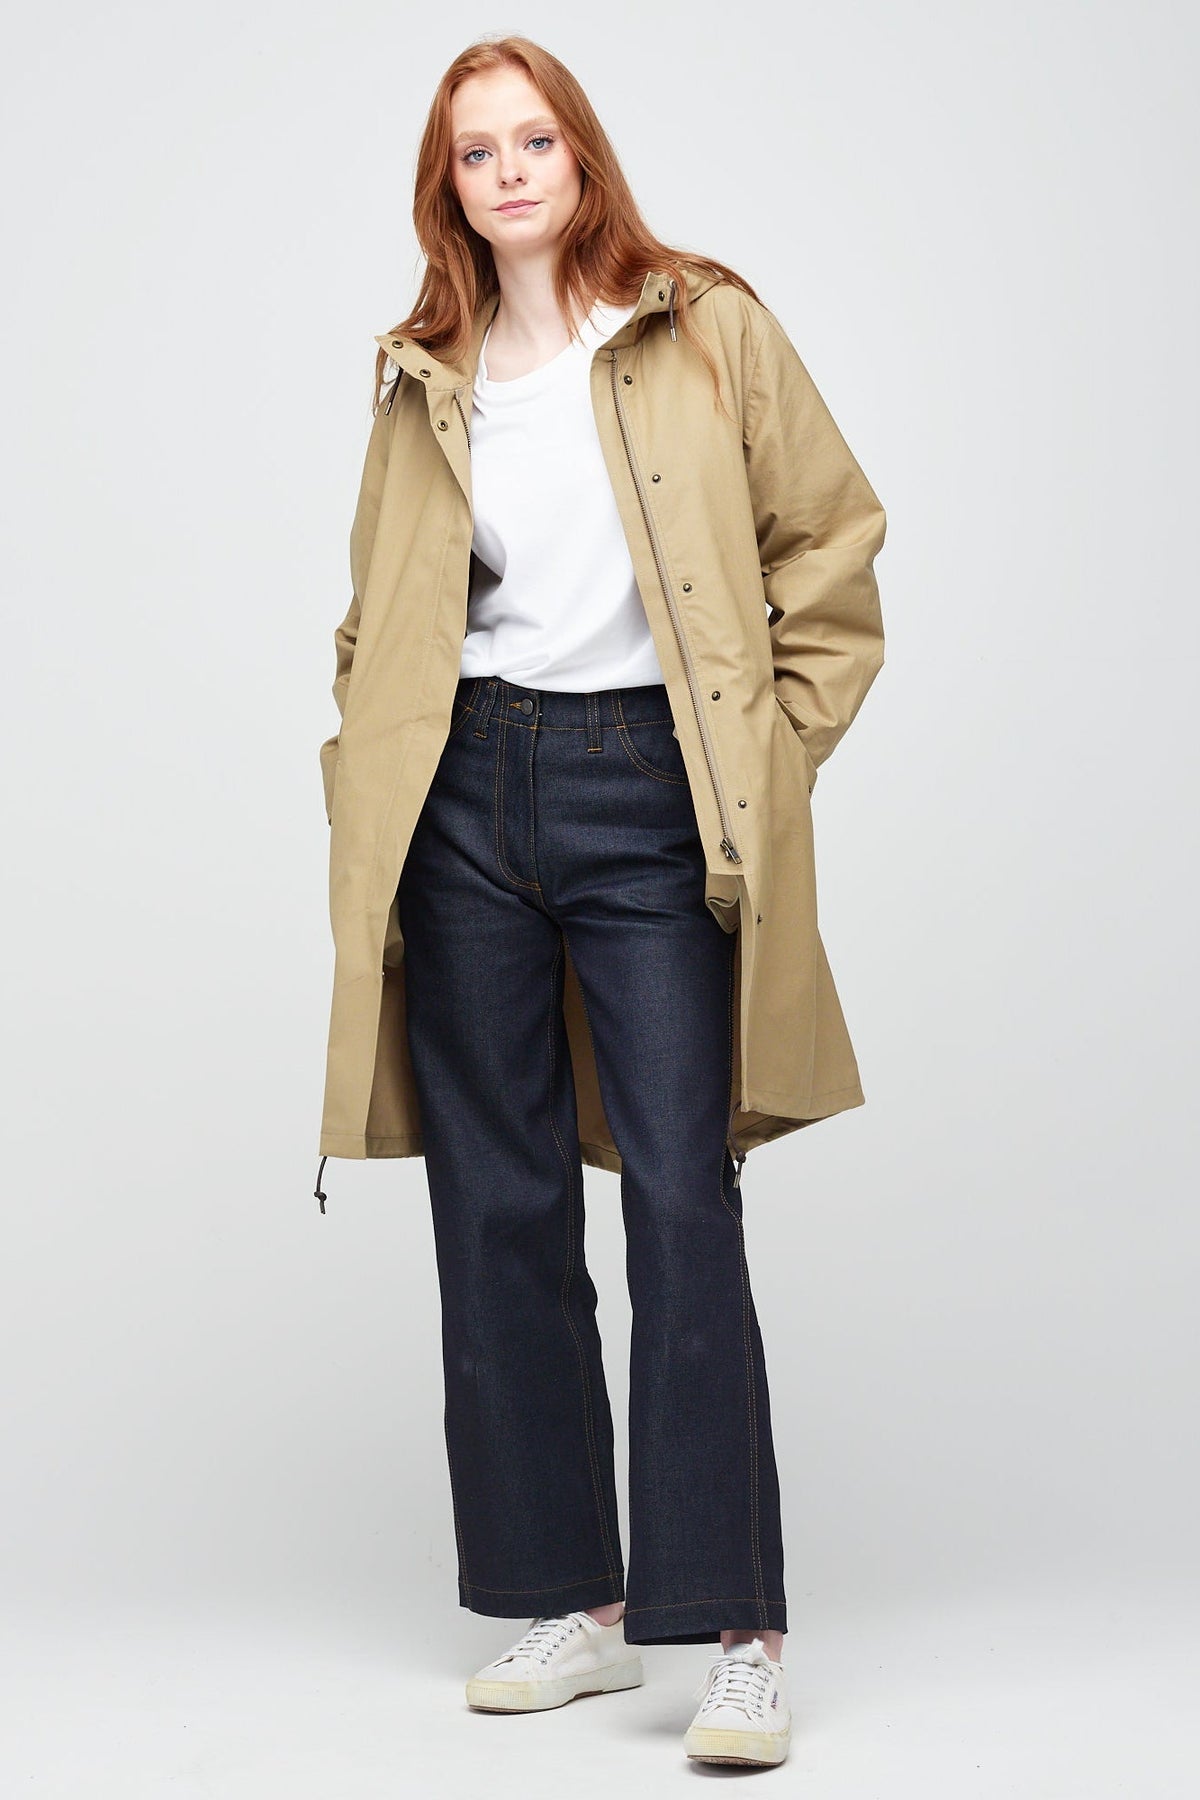 
            Front shot of a young, white female model with ginger hair wearing long stone coloured parka. The parka is styled with indigo jeans and a white trainer.